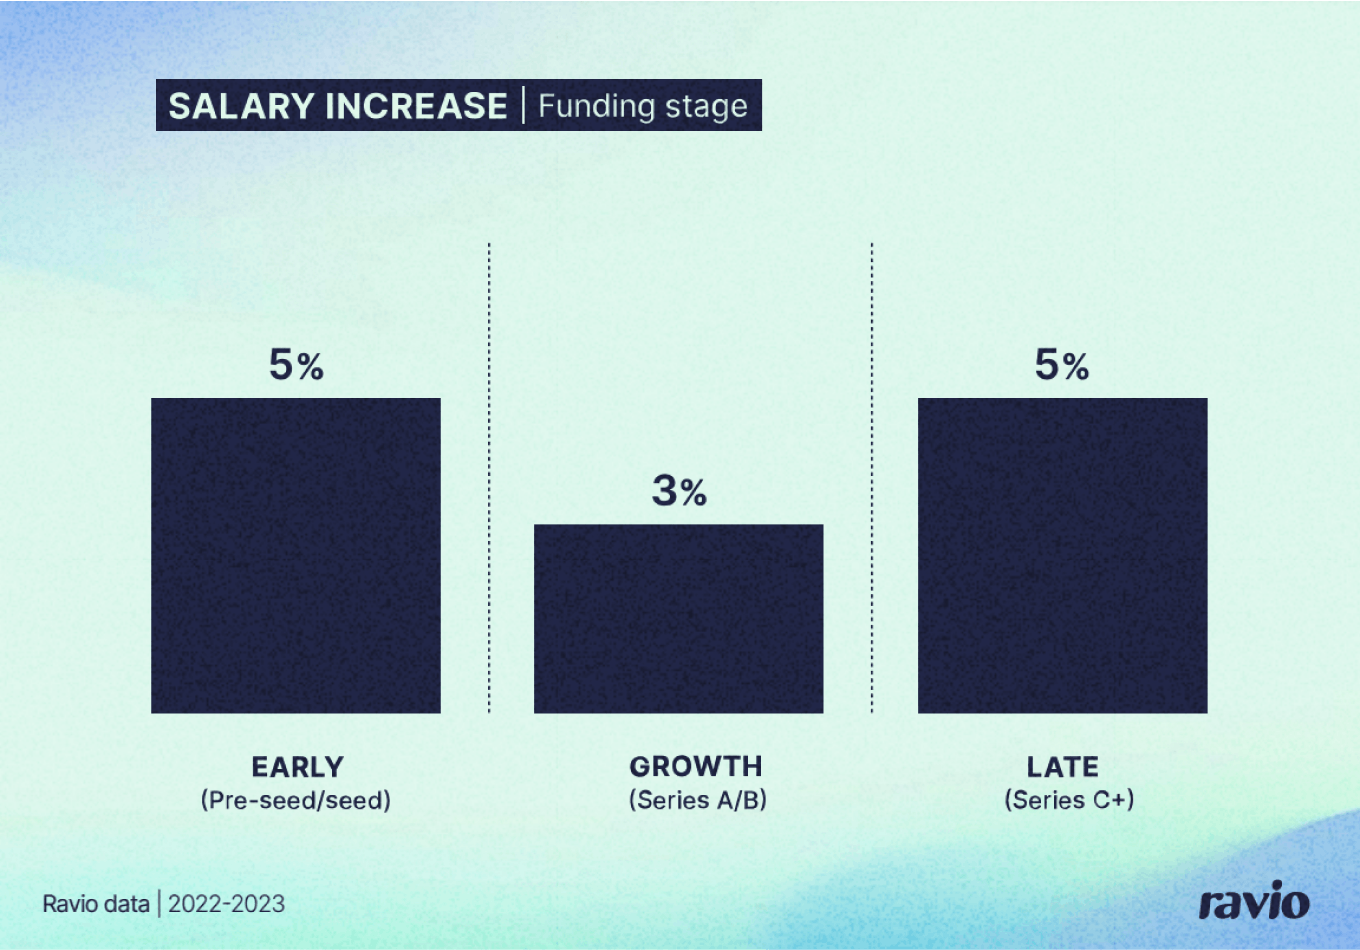 Graph showing salary increase per funding stage